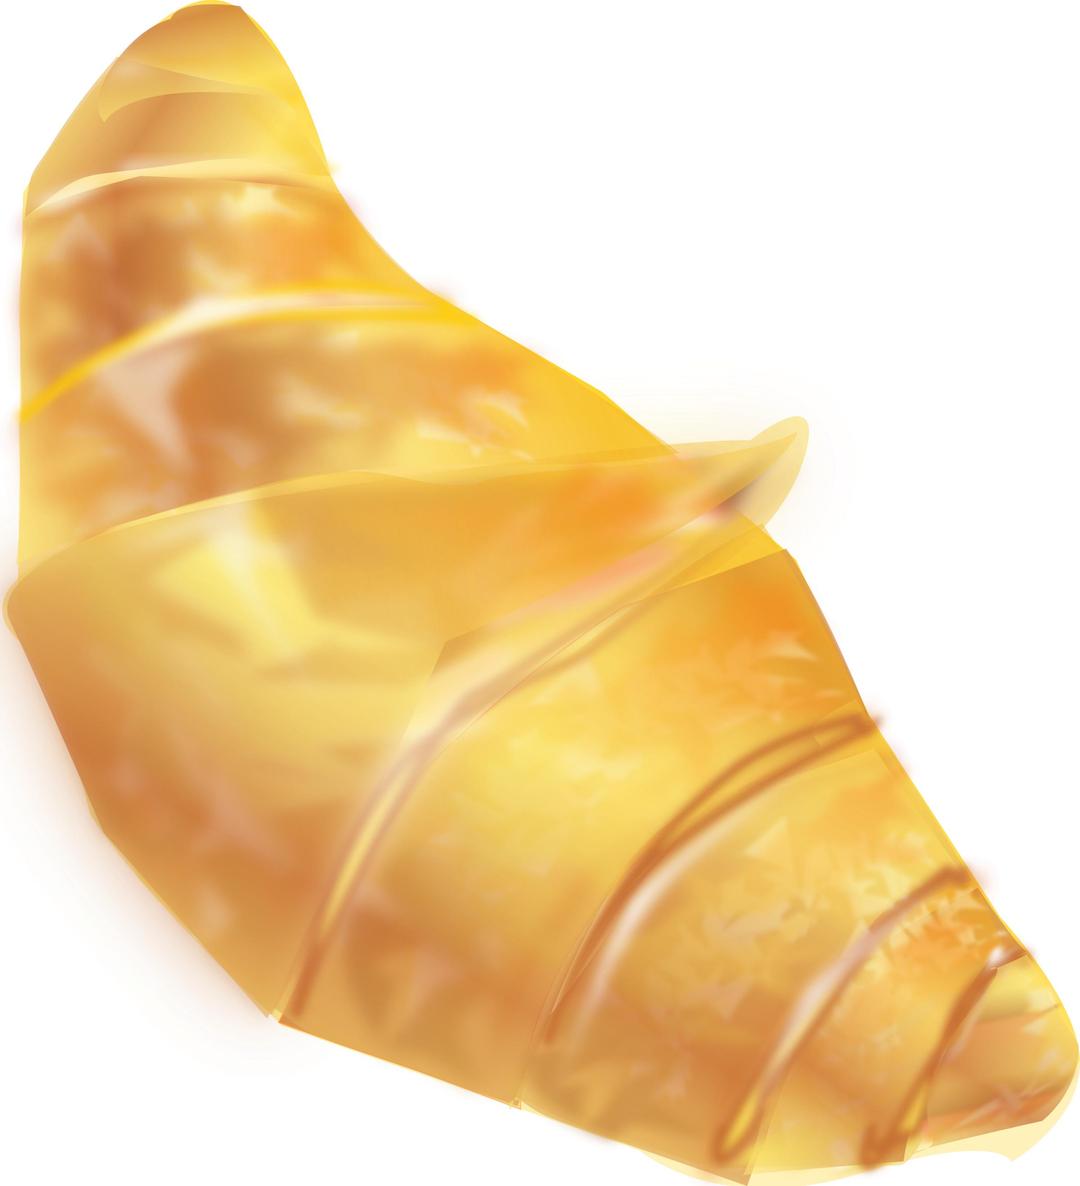 French butter croissant png transparent